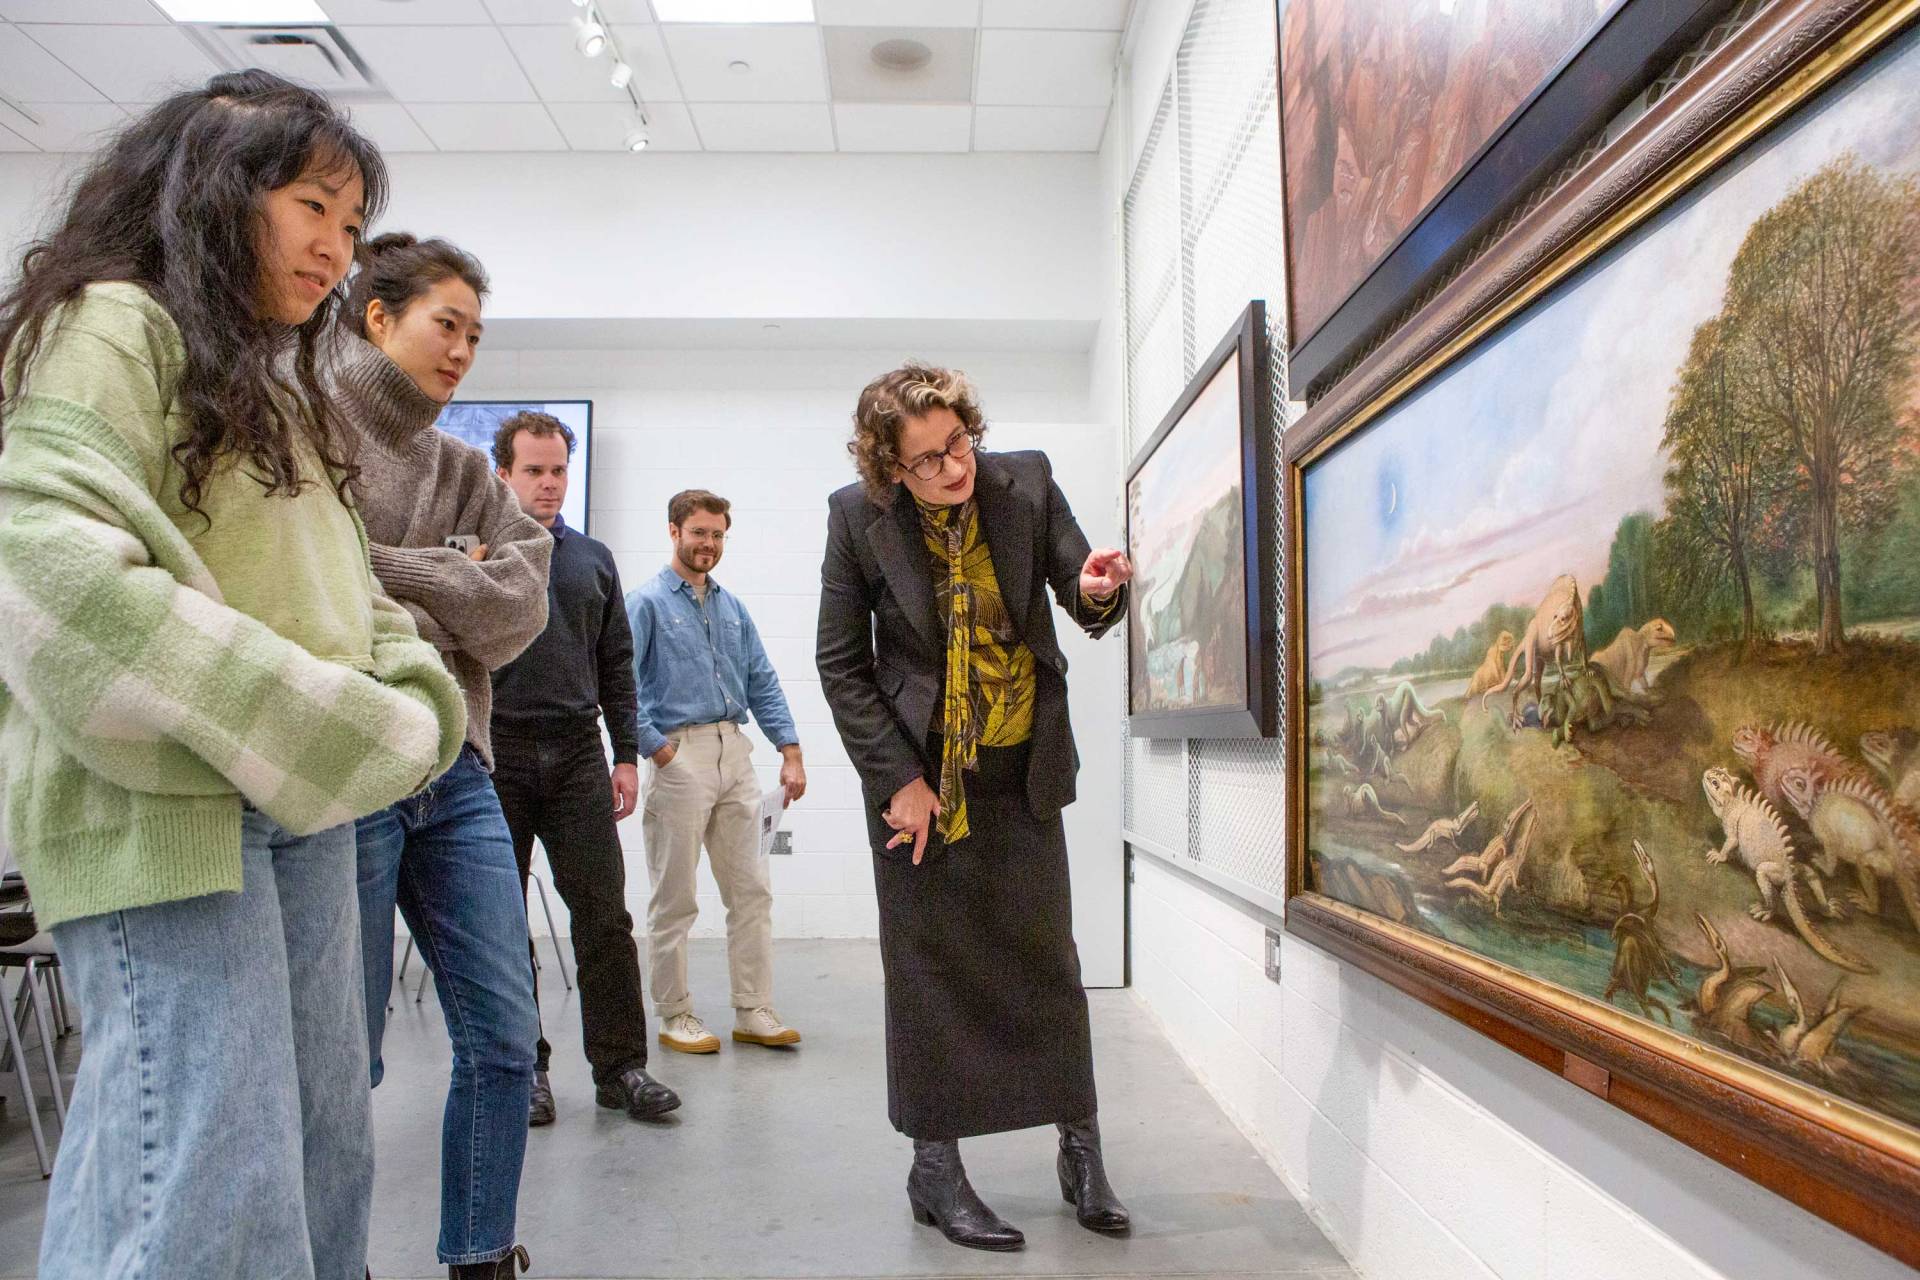 Prof DeLue points to a painting